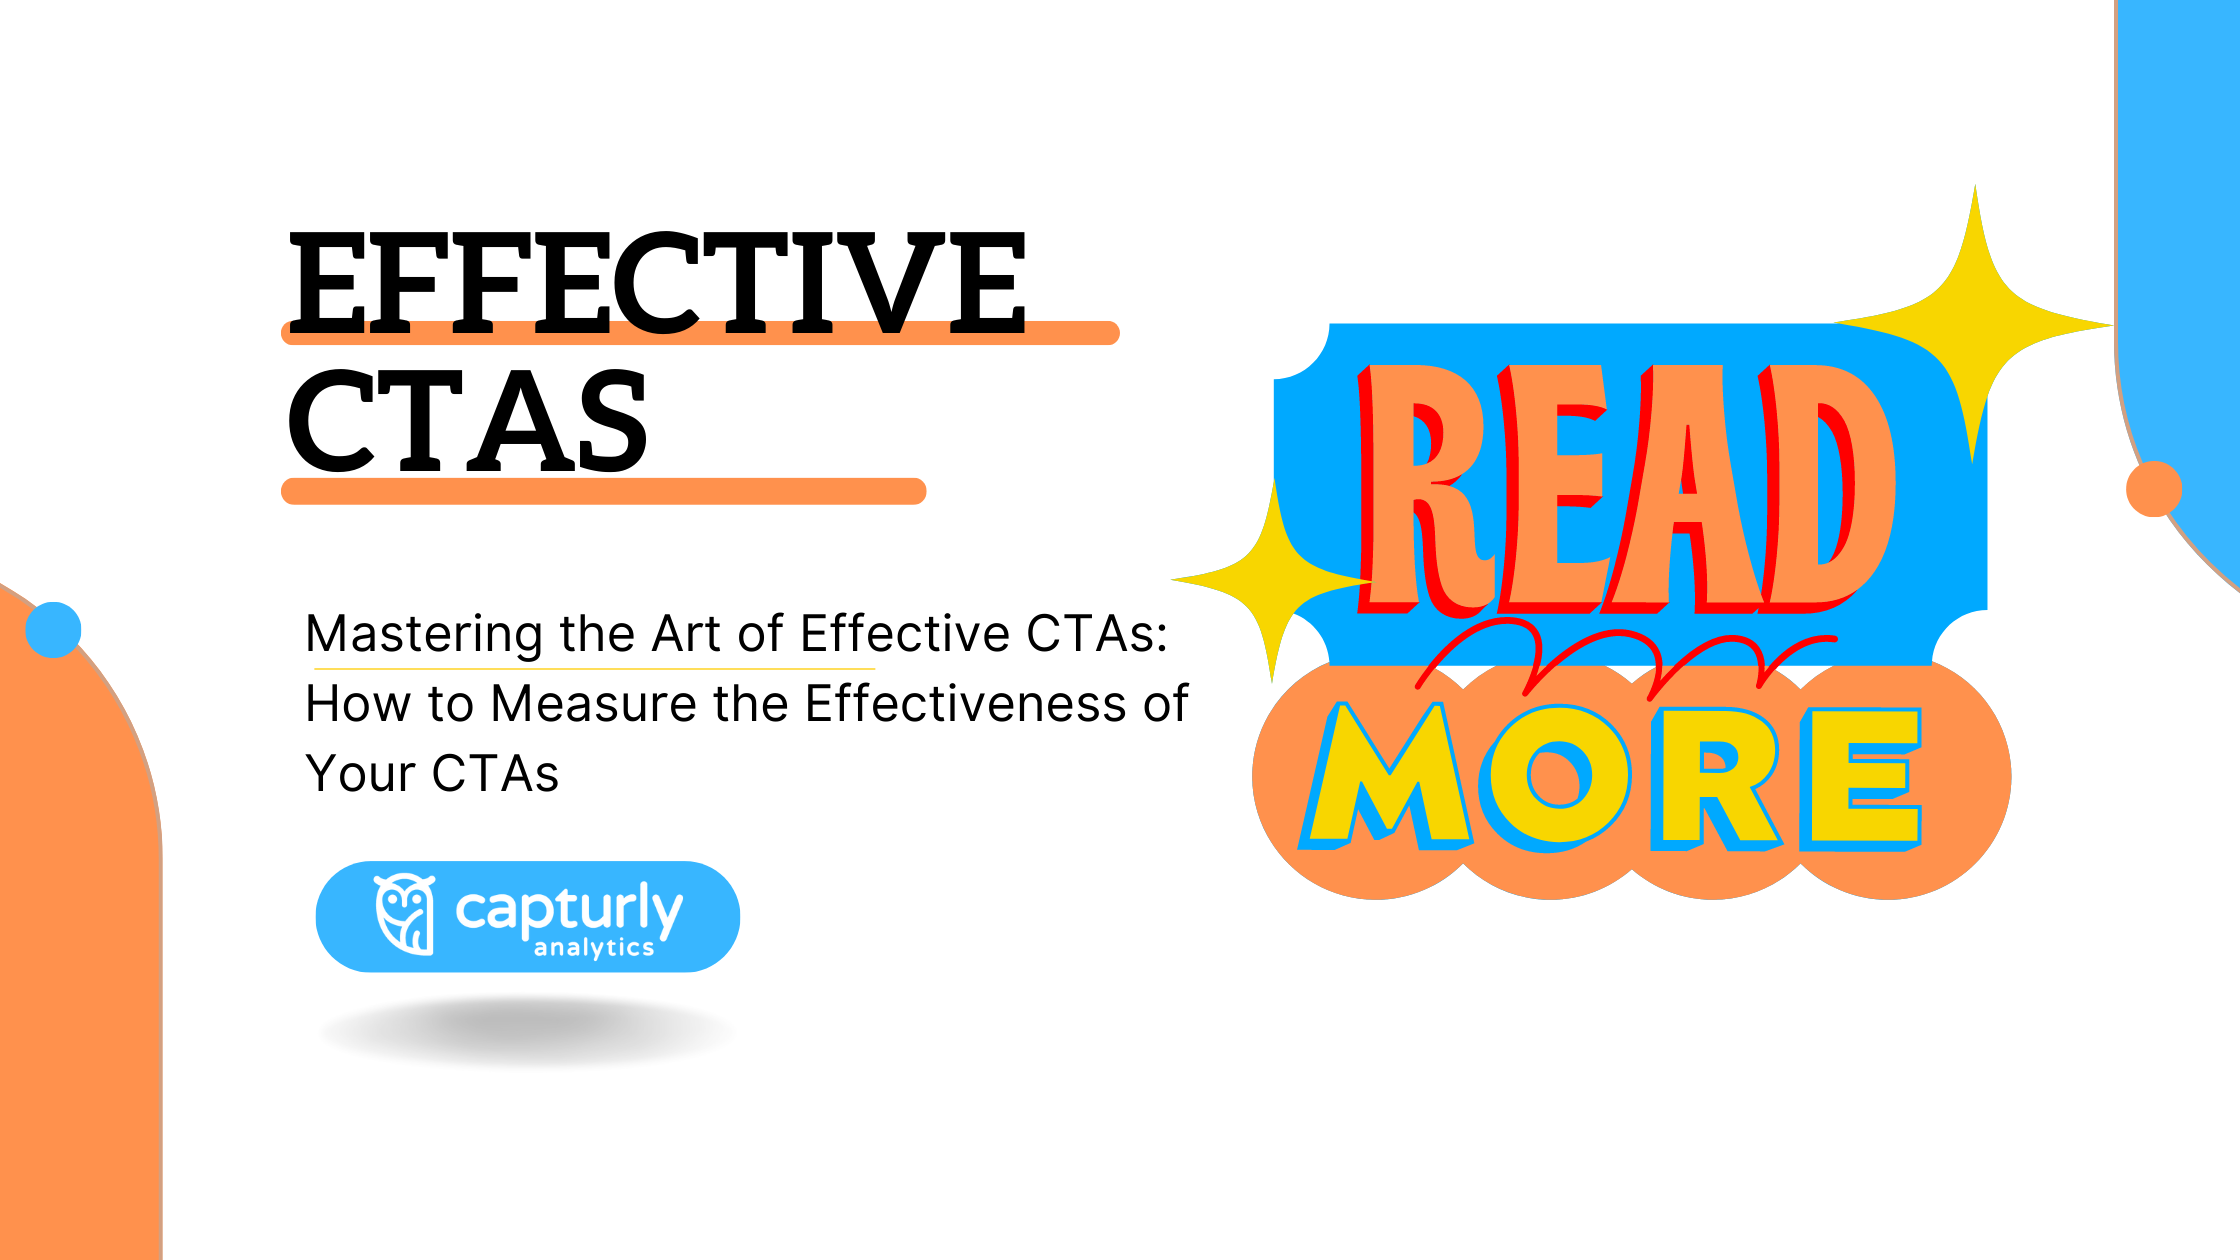 Mastering the Art of Effective CTAs: How to Measure the Effectiveness of Your CTAs, Read more CTA button